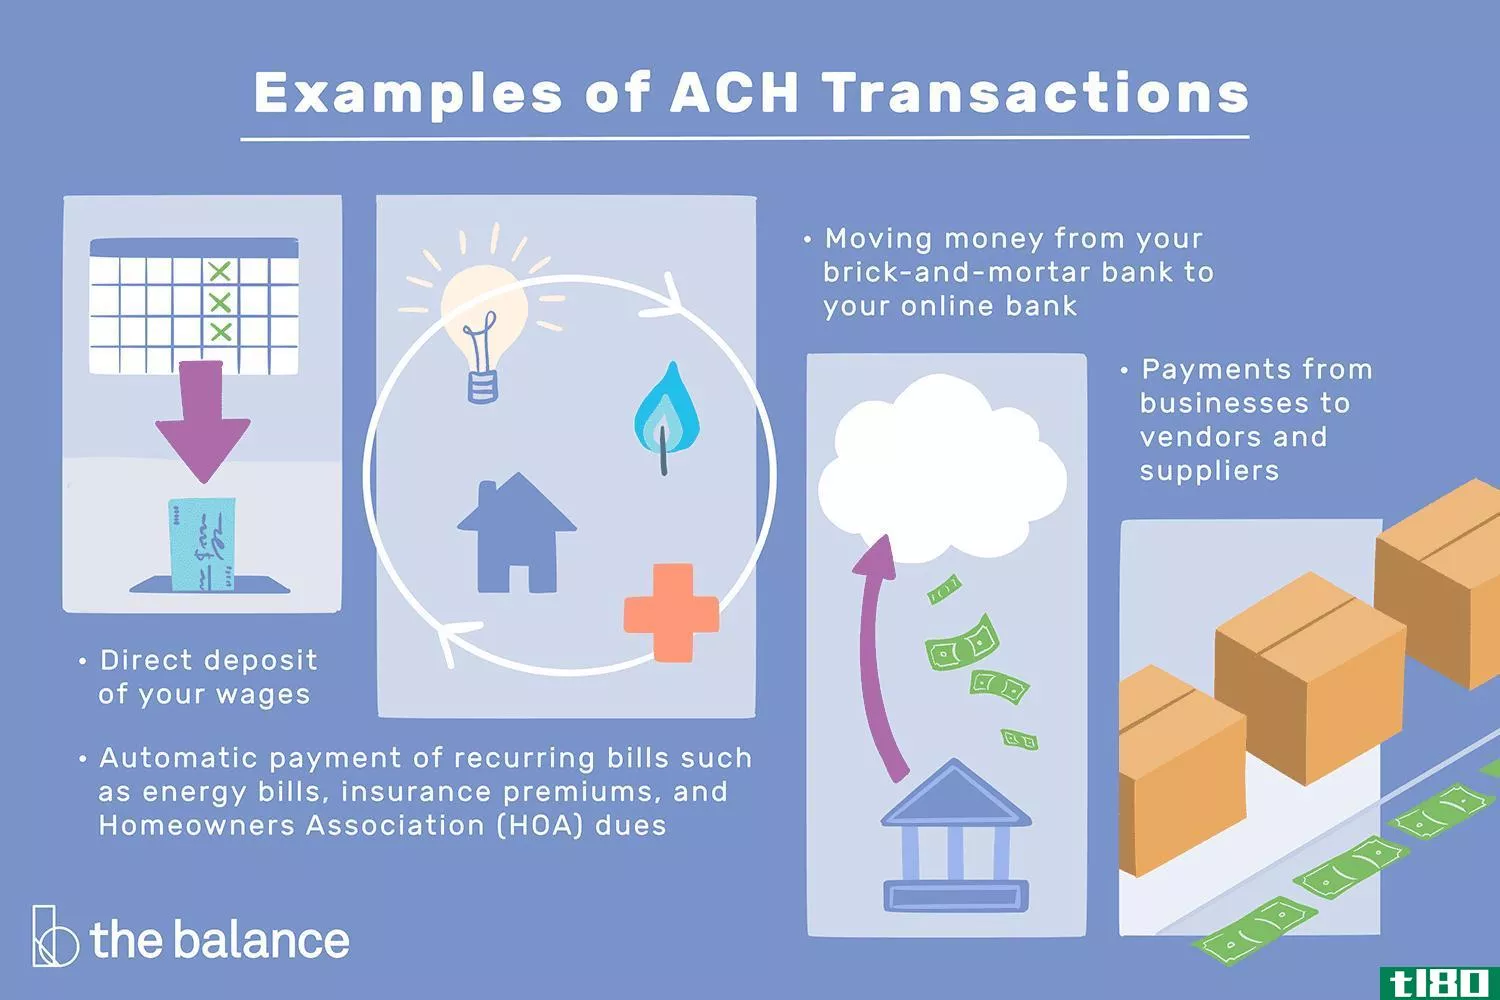 Text reads: "Examples of ACH Transacti***: direct deposit of your wages; automatic payment of recurring bills such as energy bills, insurance premiums, and homeowners association dues; moving money from your brick-and-mortar bank to your online bank; payments from businesses to vendors and suppliers"